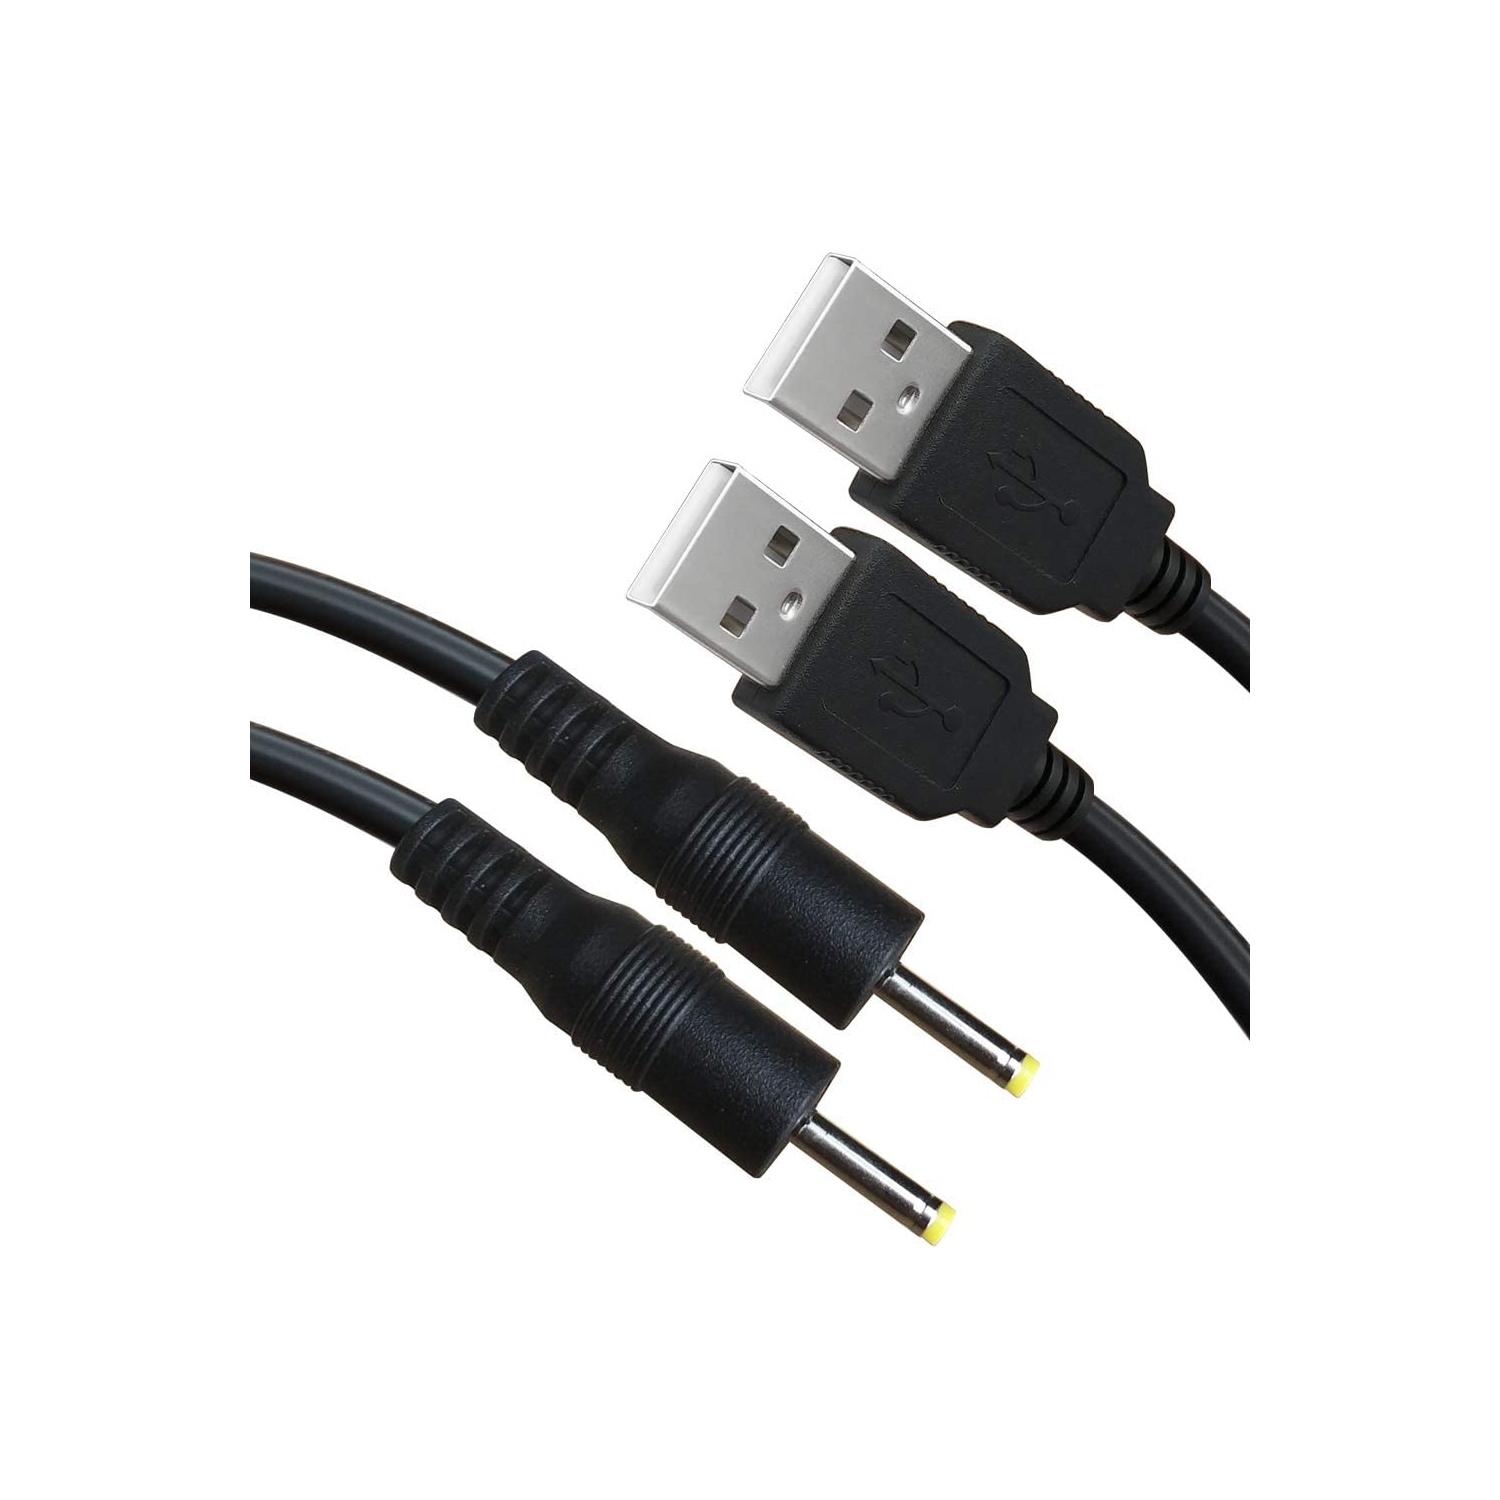 5Feet 2Pack USB to 2.5mm Charging Cable for Dragon Touch X10, RCA Cambio W101 V2, NeuTab N7S Pro,Tagital MTM-7054,